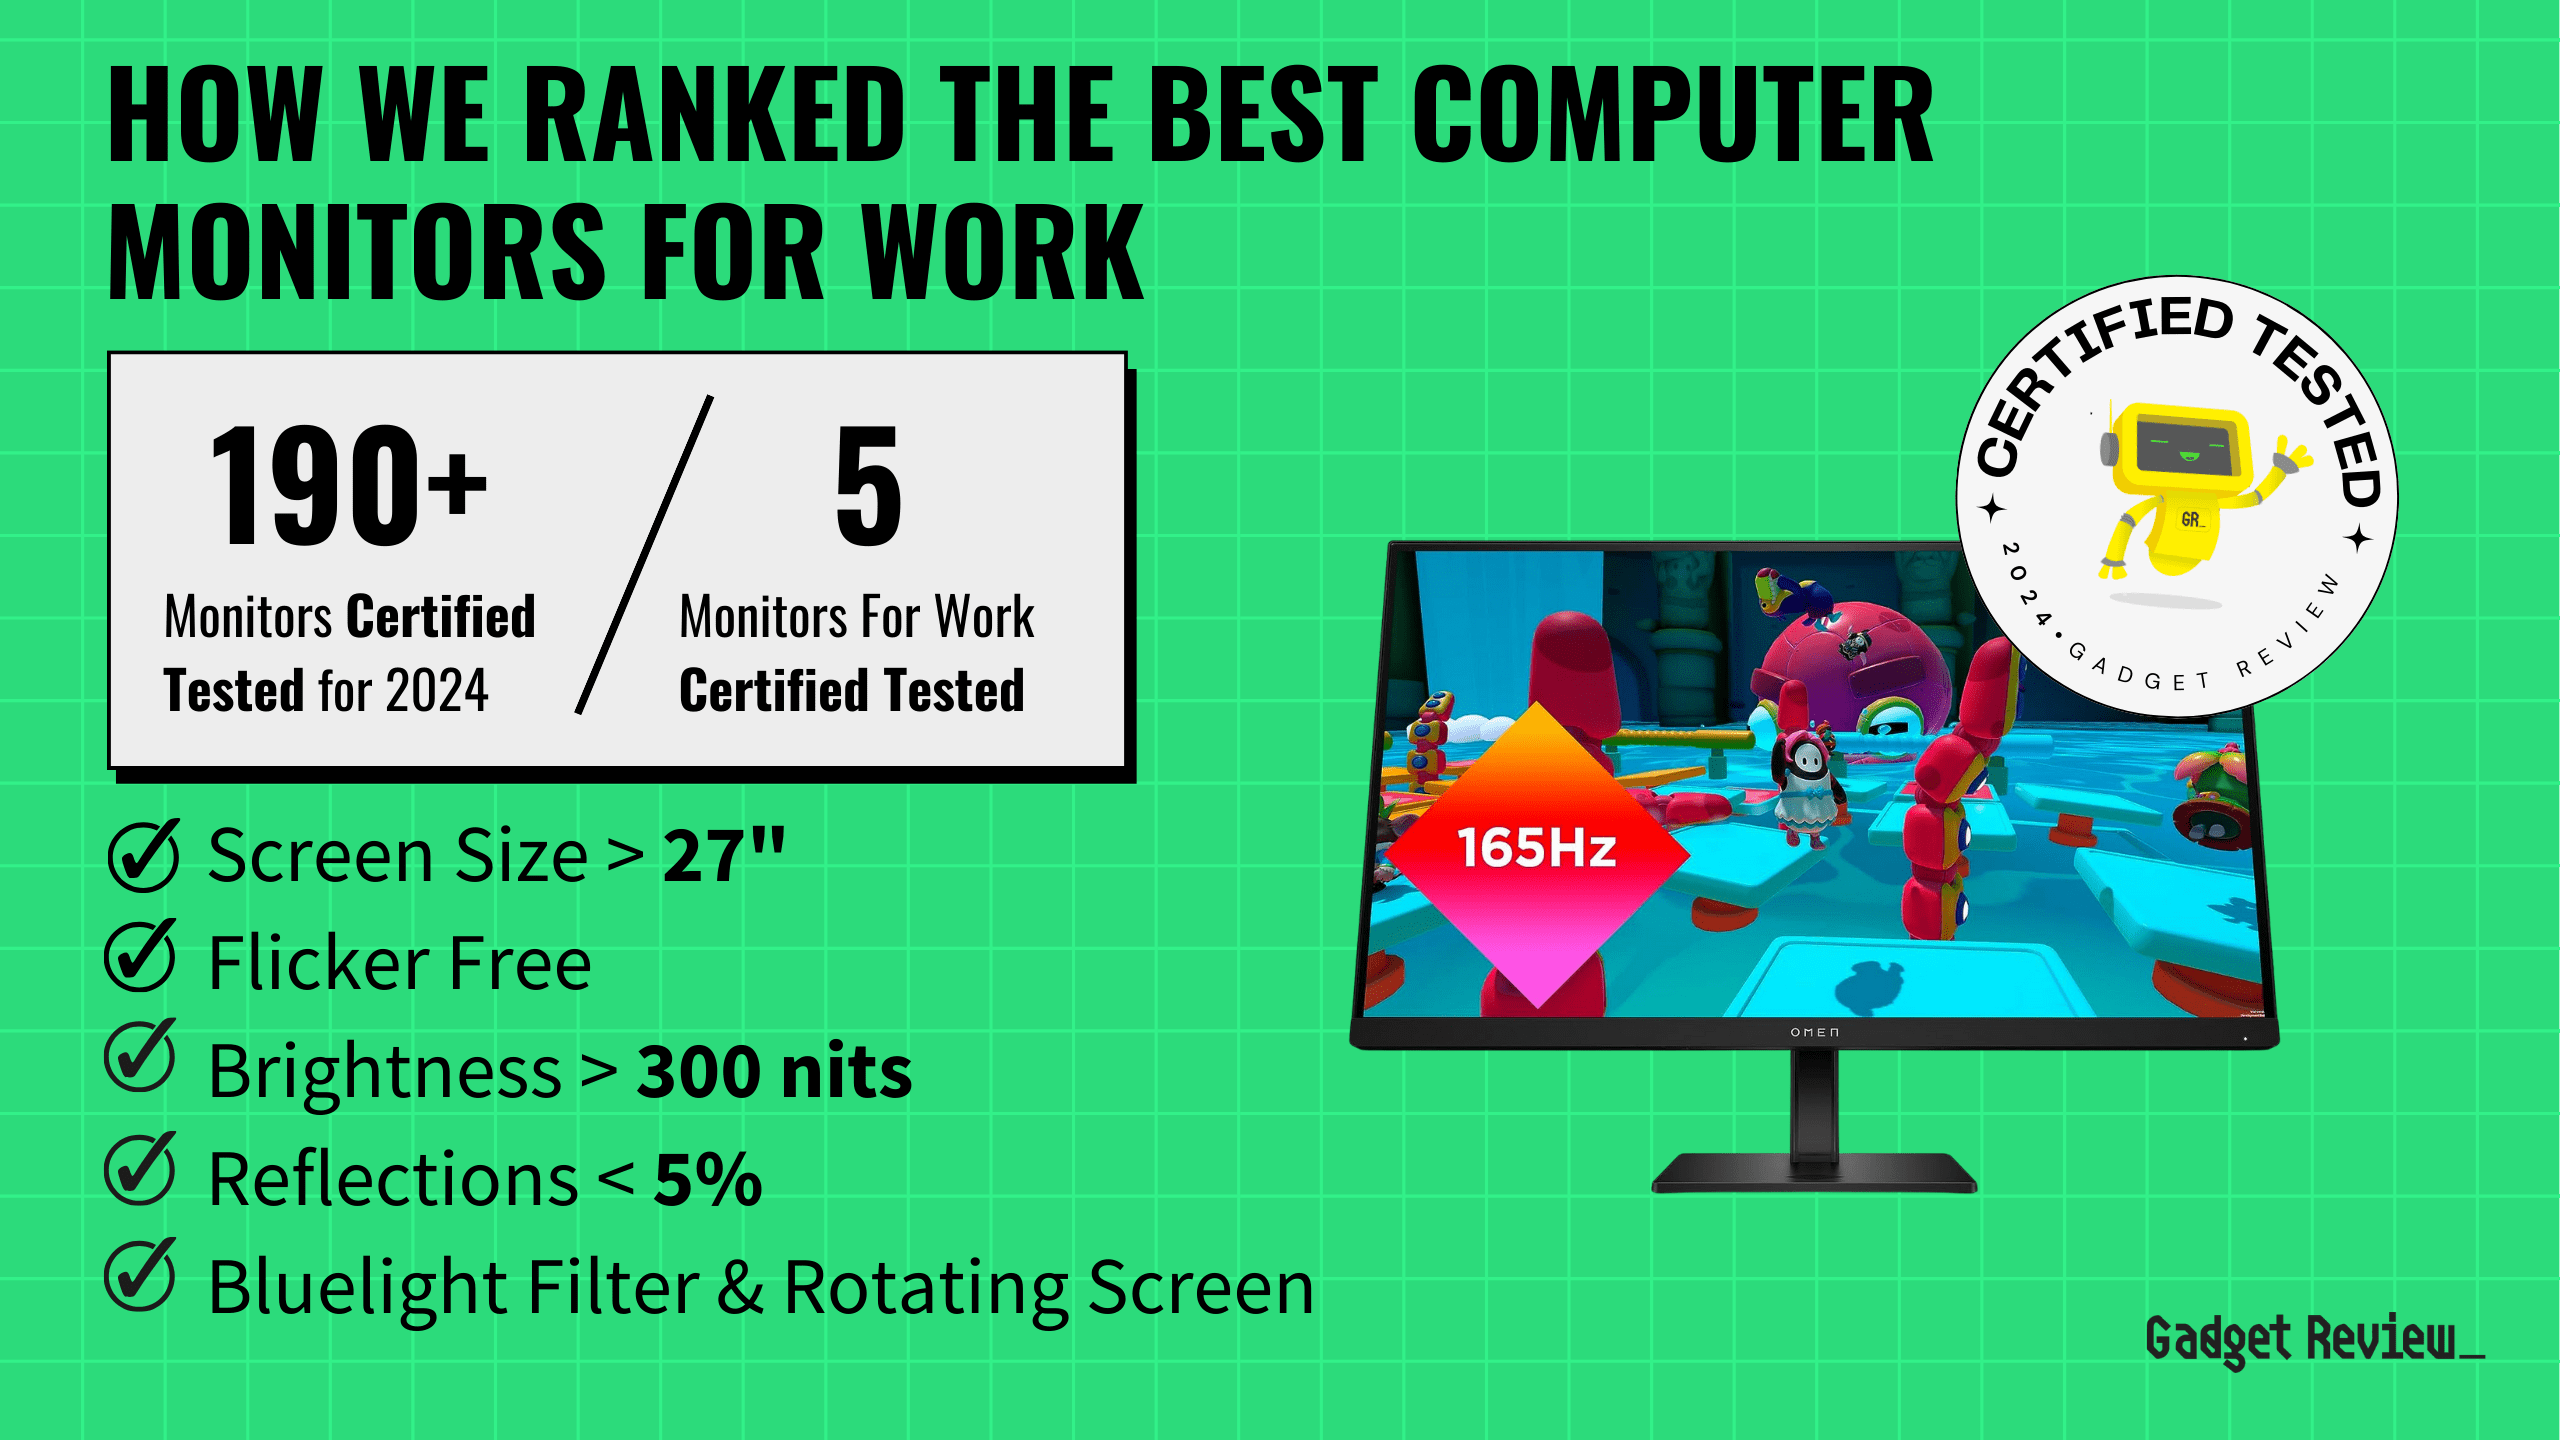 What Are The Top 5 Computer Monitors For Work?